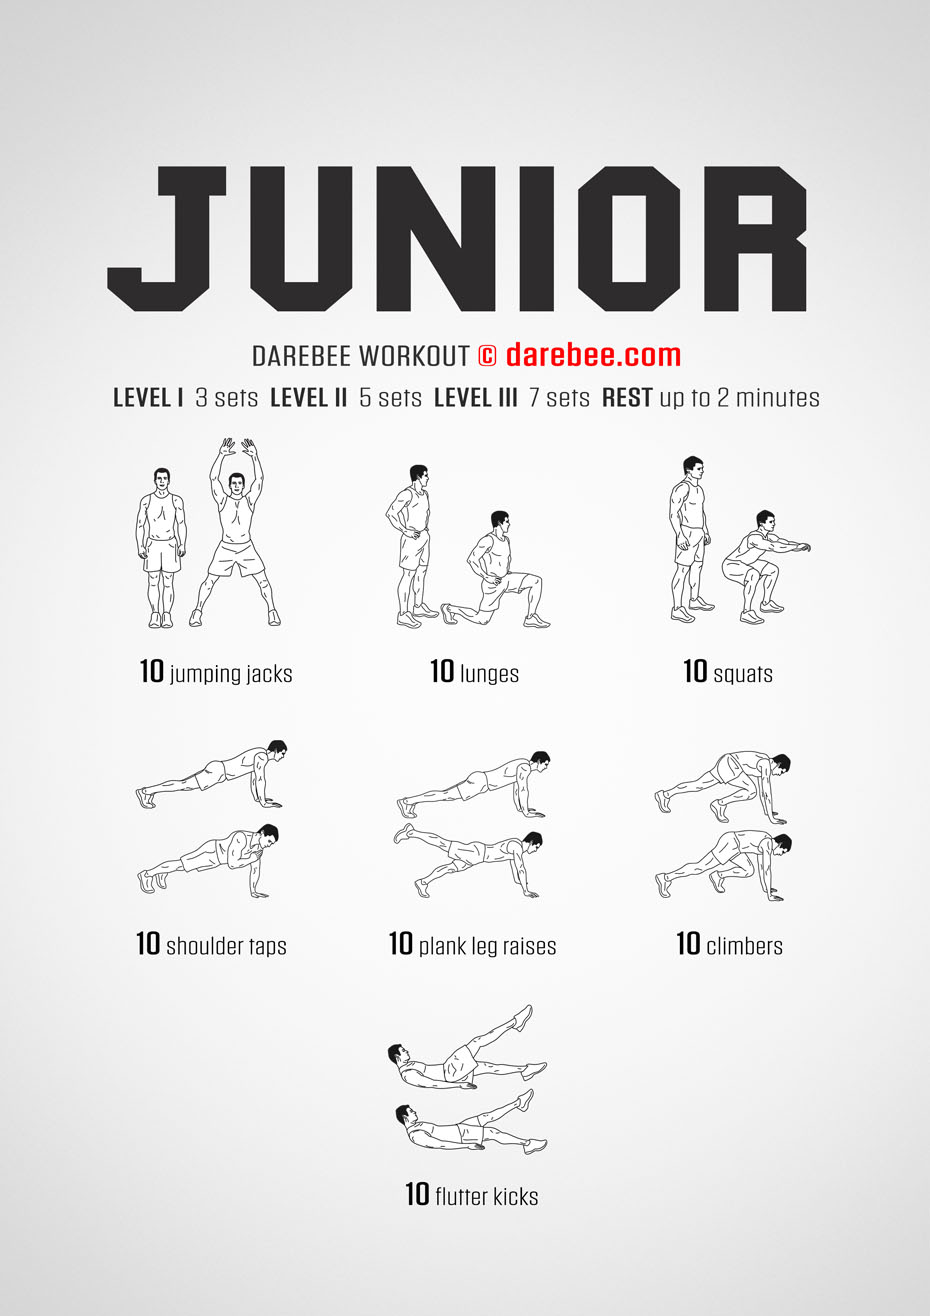 Junior is a Darebee home fitness, full body functional strength workout you can do as part of your consistent, daily, incremental fitness journey.